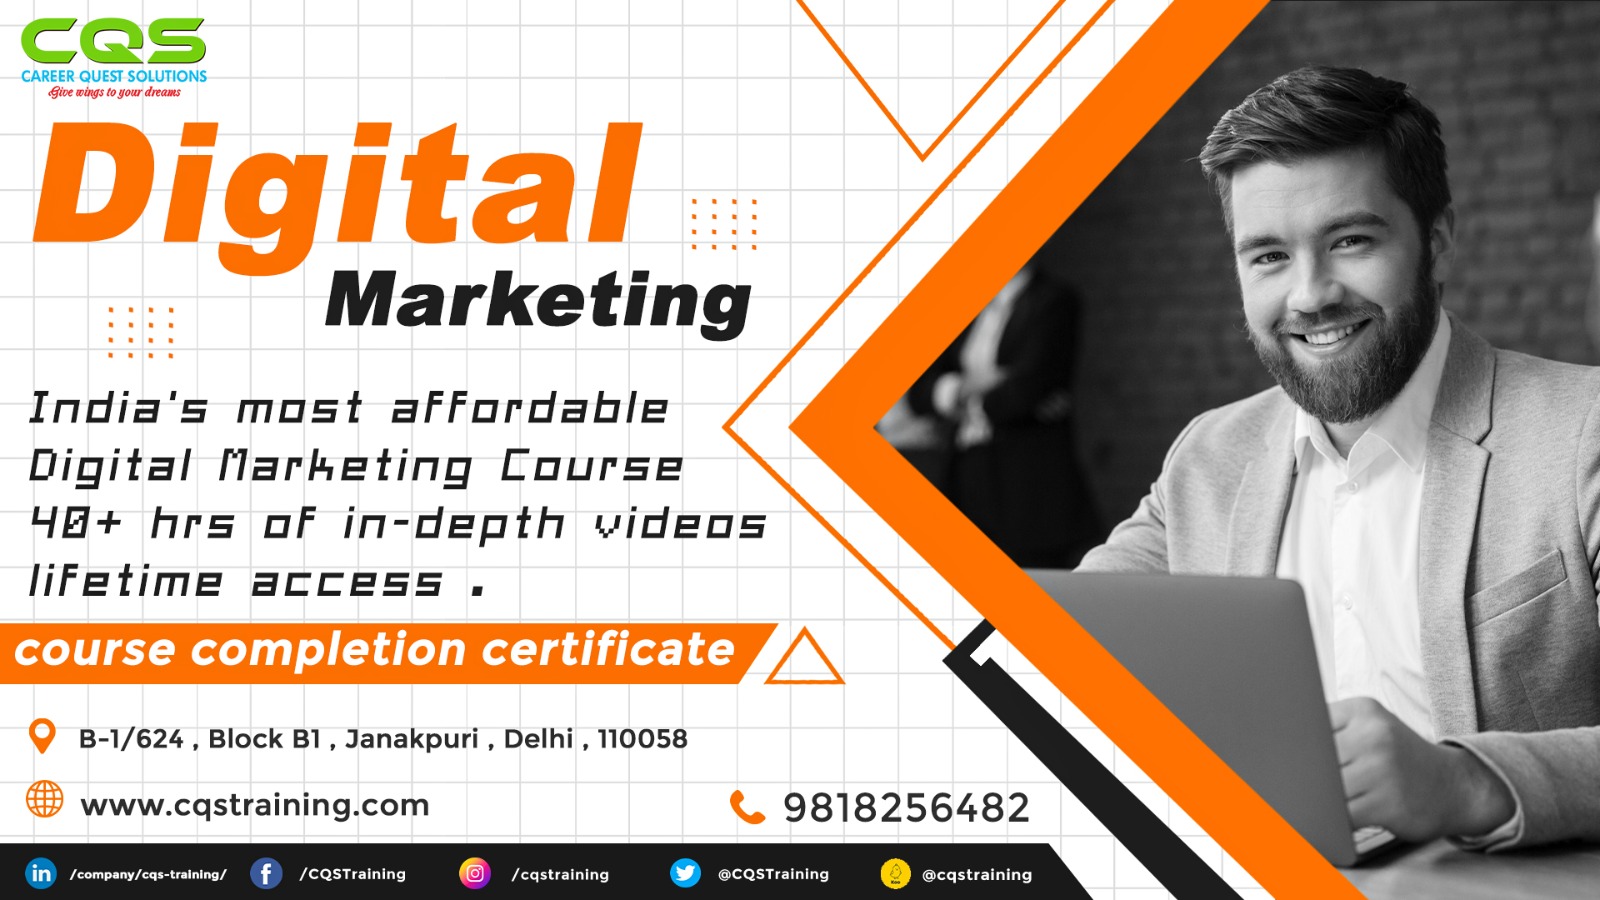 You are currently viewing Digital Marketing – Mark your presence to be Number 1 in Digital World